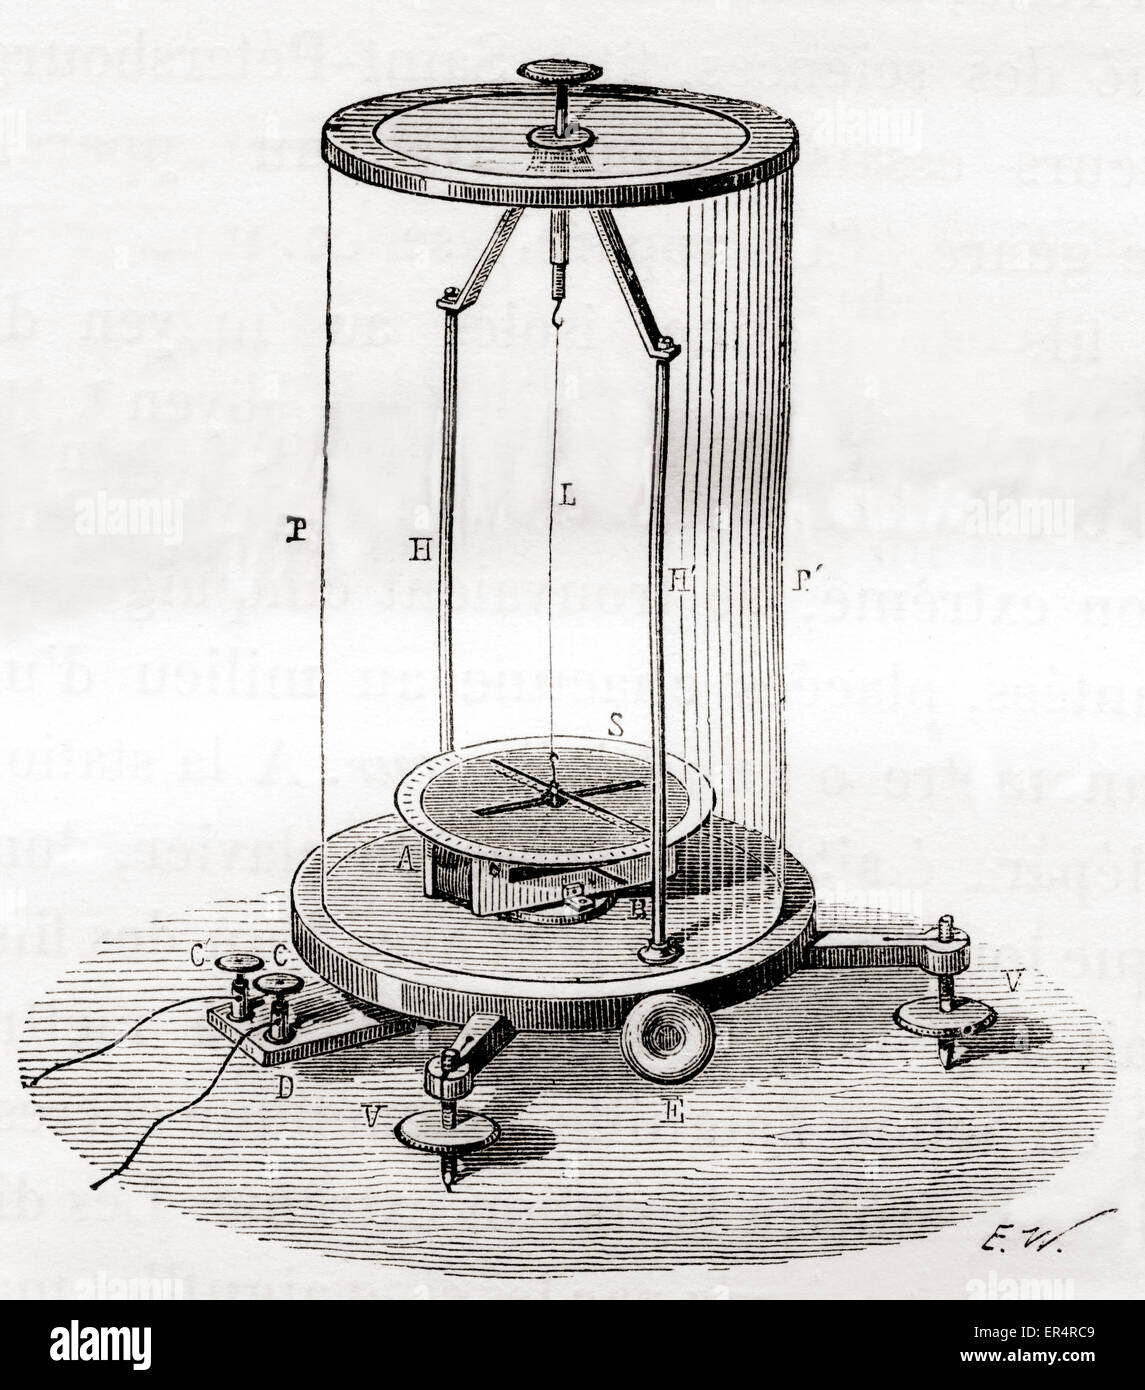 An early galvanometer, a type of ammeter, a measuring instrument used to measure the electric current in a circuit. Stock Photo